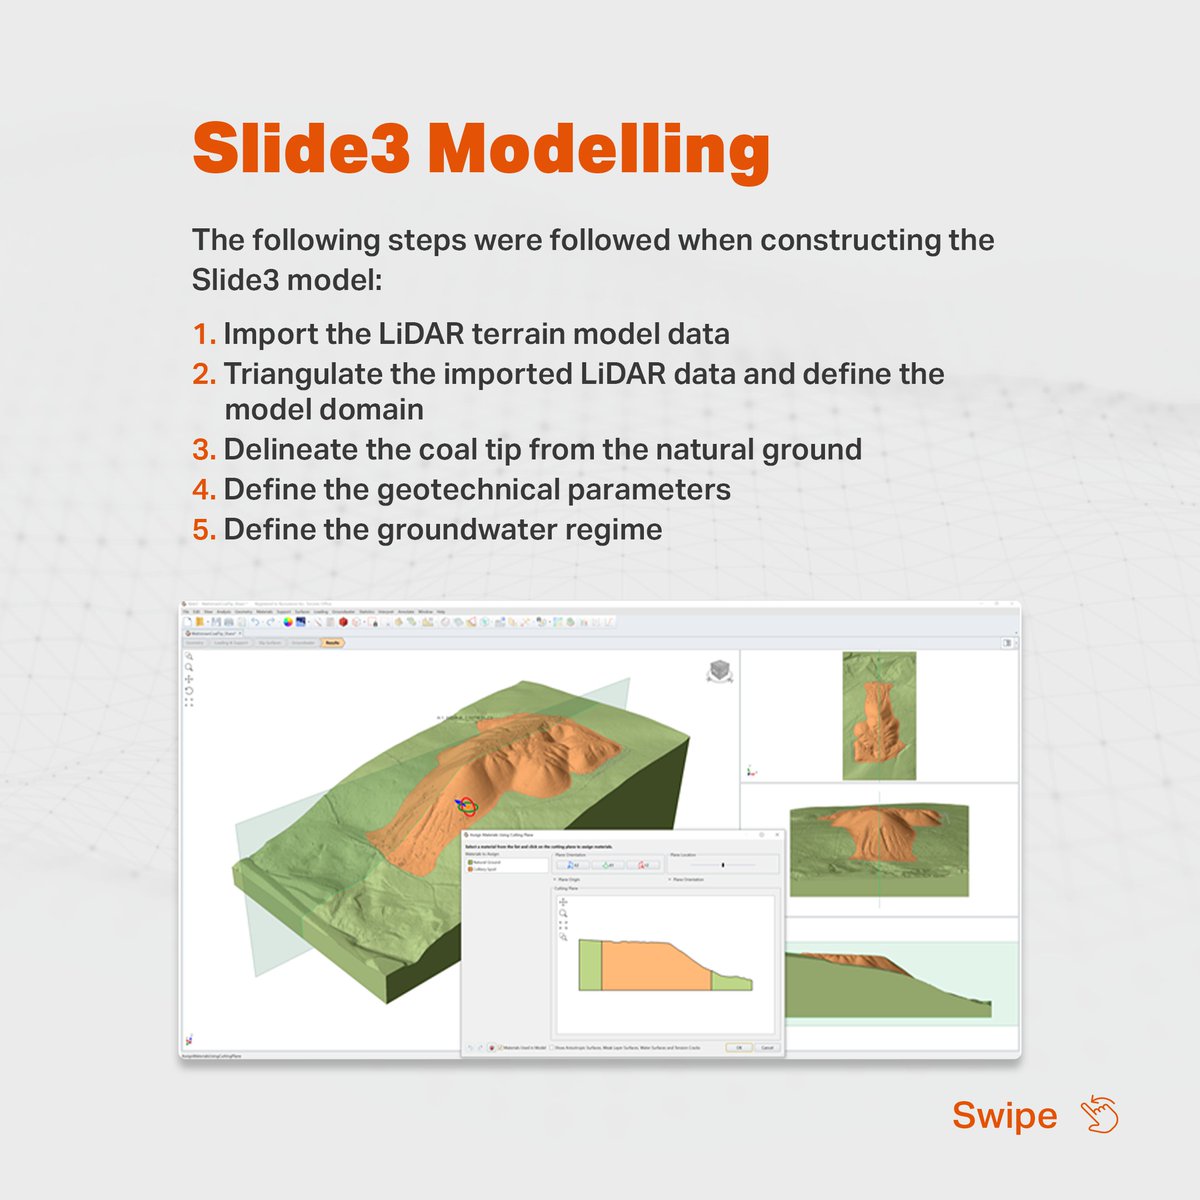 High-risk coal tips in Wales require efficient maintenance despite limited data. This technical article utilized simplified models to investigate the potential of using #Slide3 for 3D LEM #SlopeStability analyses in facilitating proactive decision-making. bit.ly/3FpDdaW